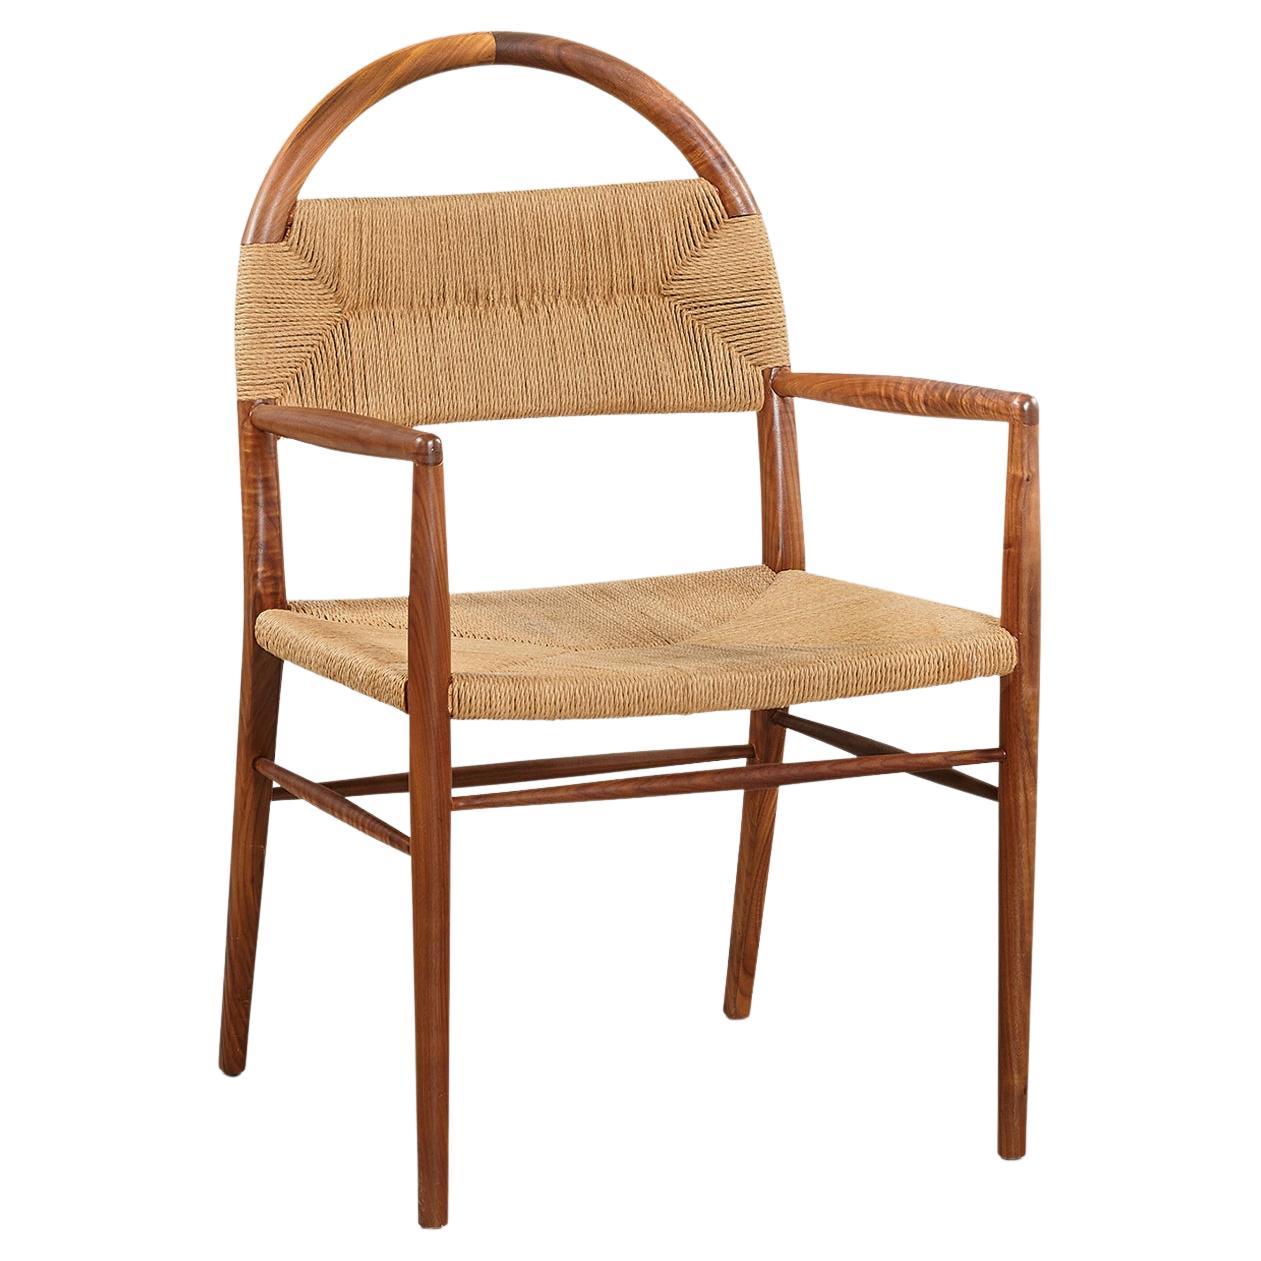 "Pernelle" Rush Weave and Walnut Dining Arm Chair by Christiane Lemieux